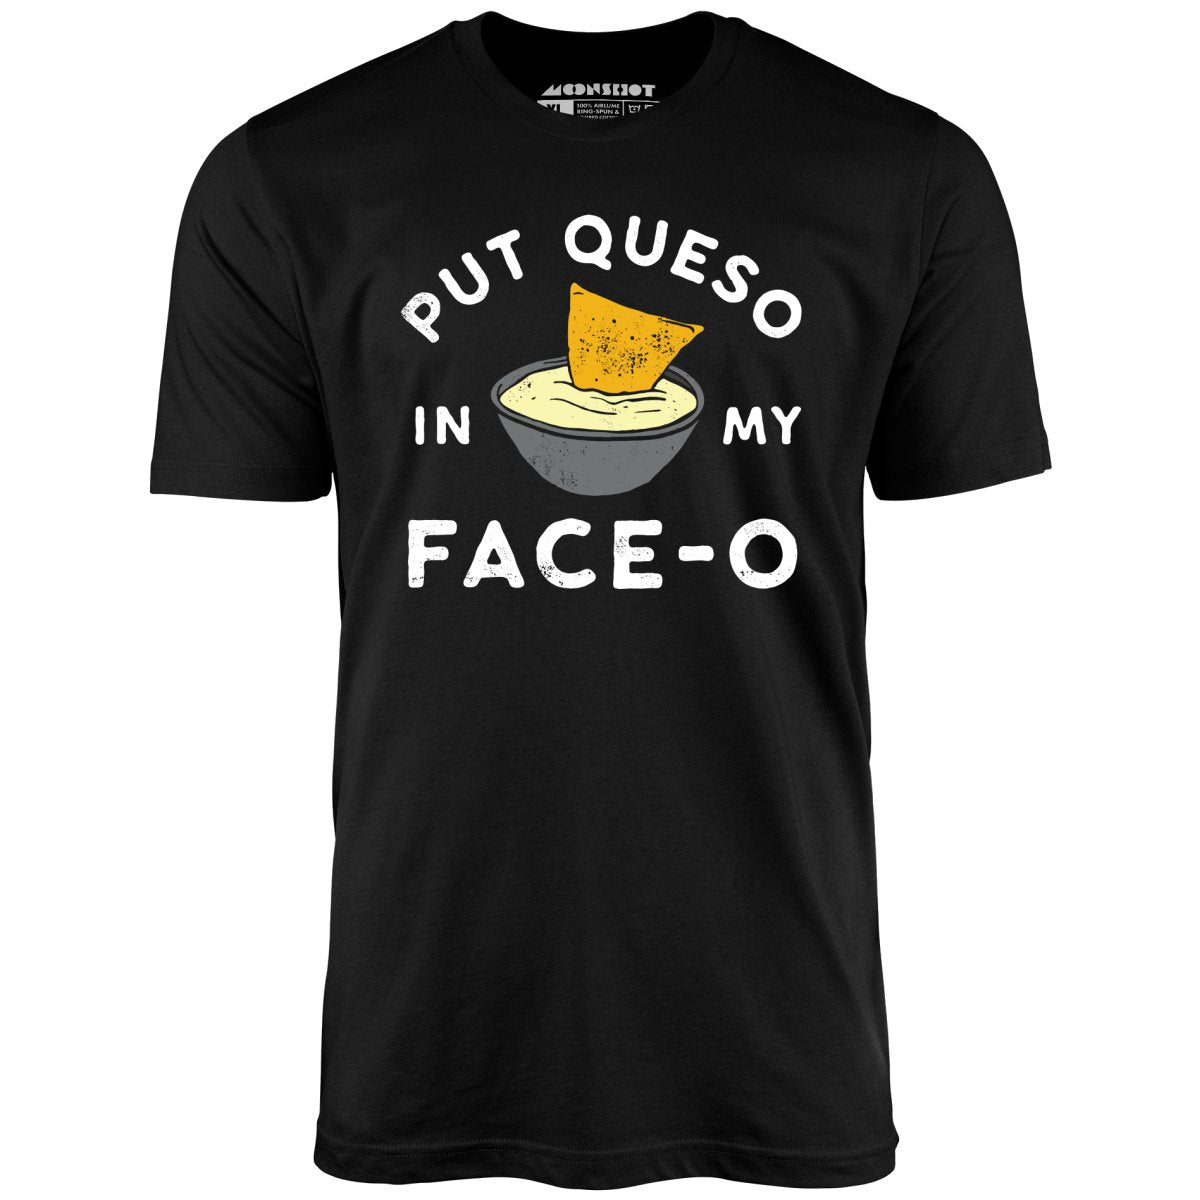 Put Queso in My Face-O - Unisex T-Shirt